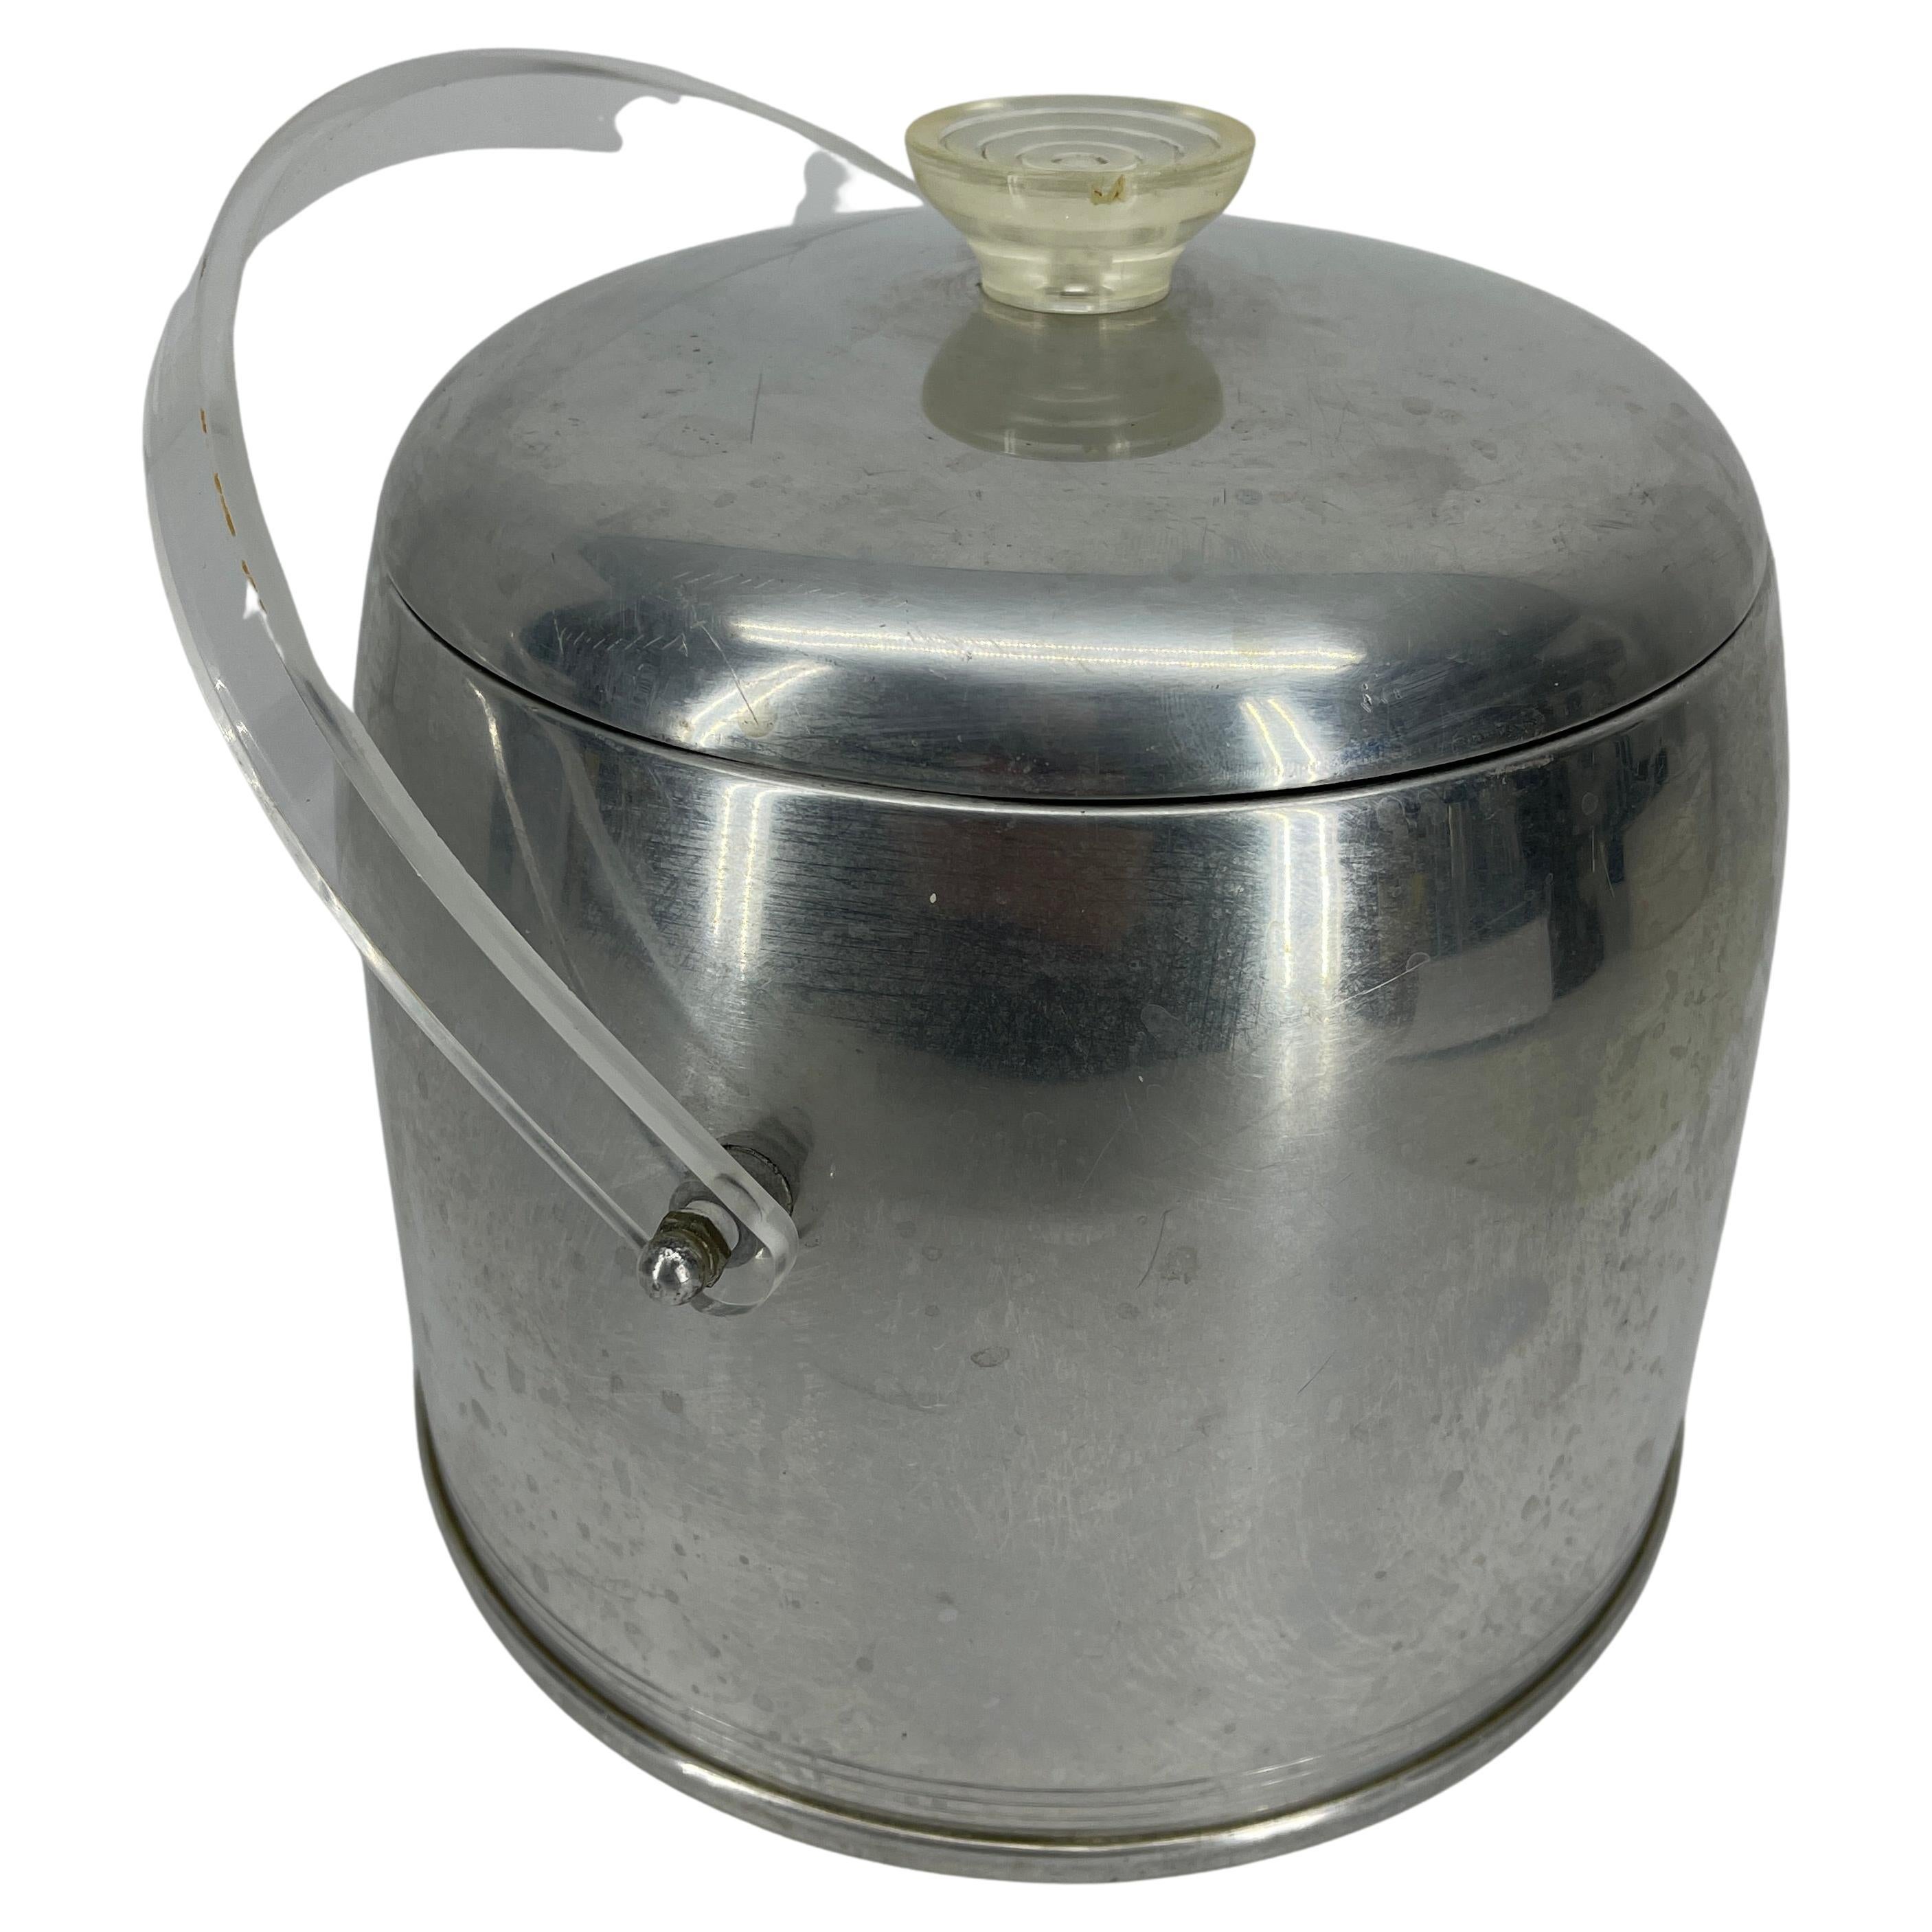 Vintage Aluminum Ice Bucket with and Lucite Handle, Mid-Century Modern